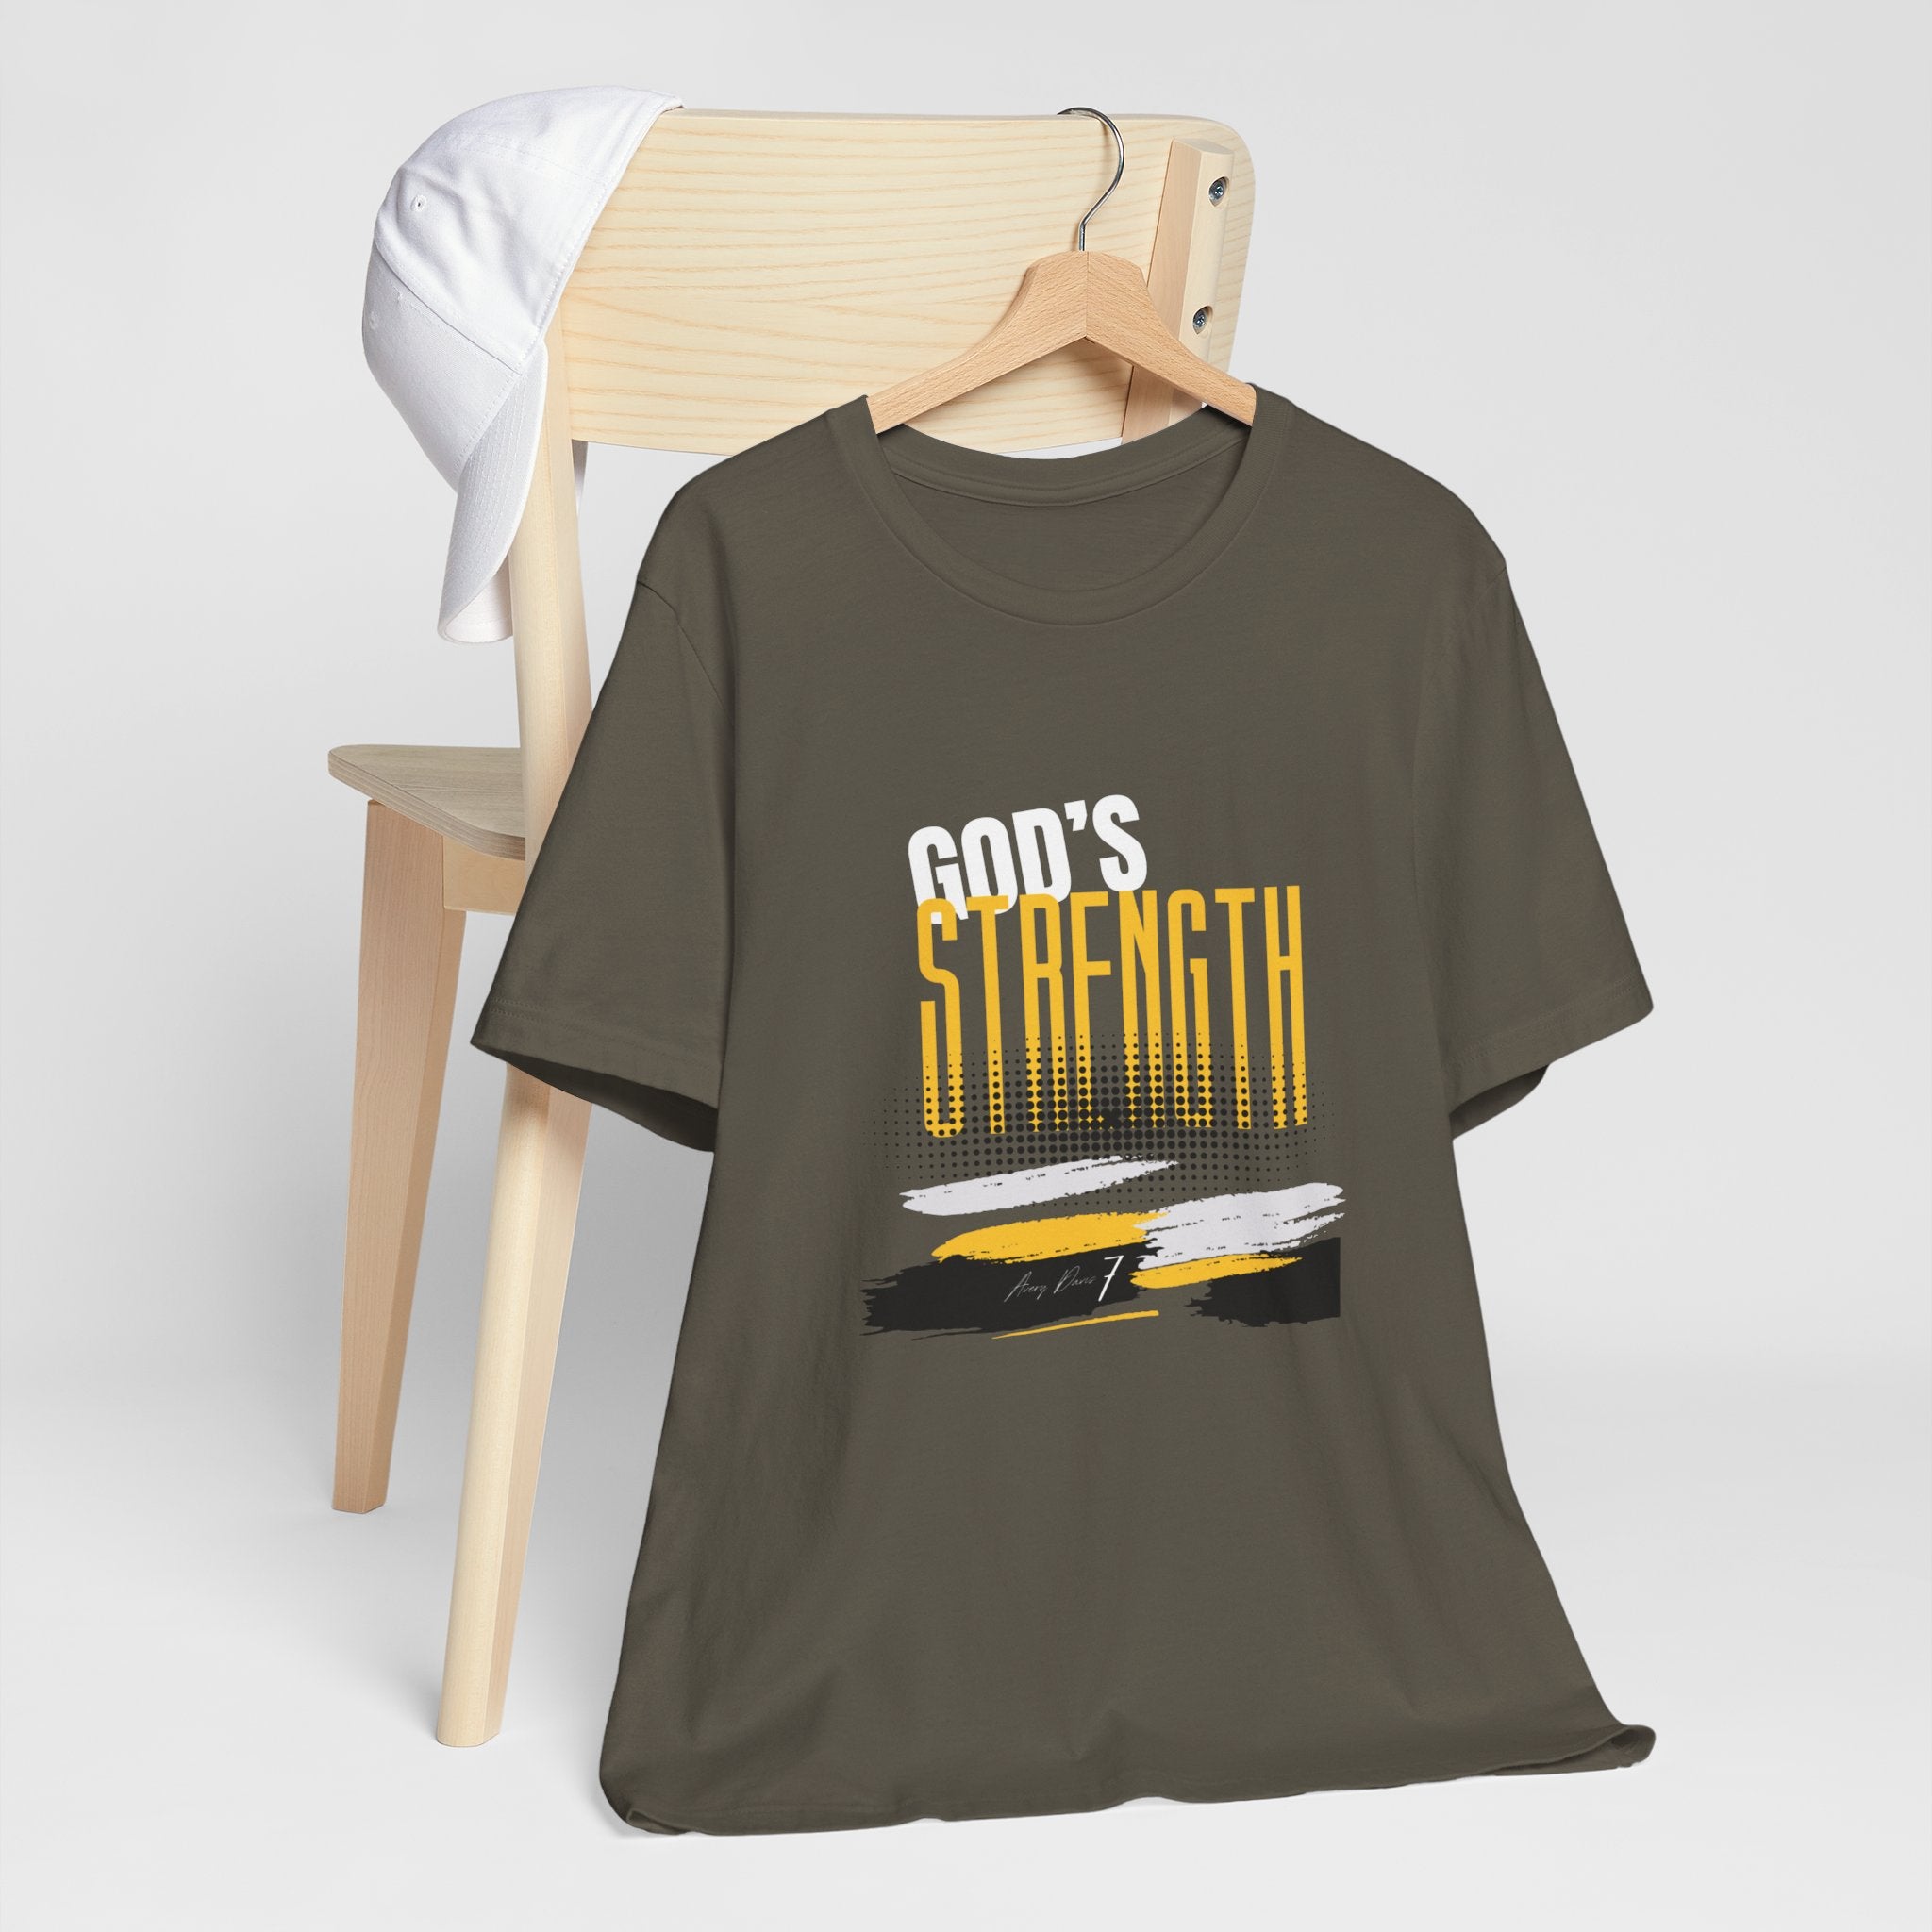 God's Strength T-shirt, Unisex Jersey Tee, DTG Printed Shirt, Crew Neck, Men's and Women's Clothing